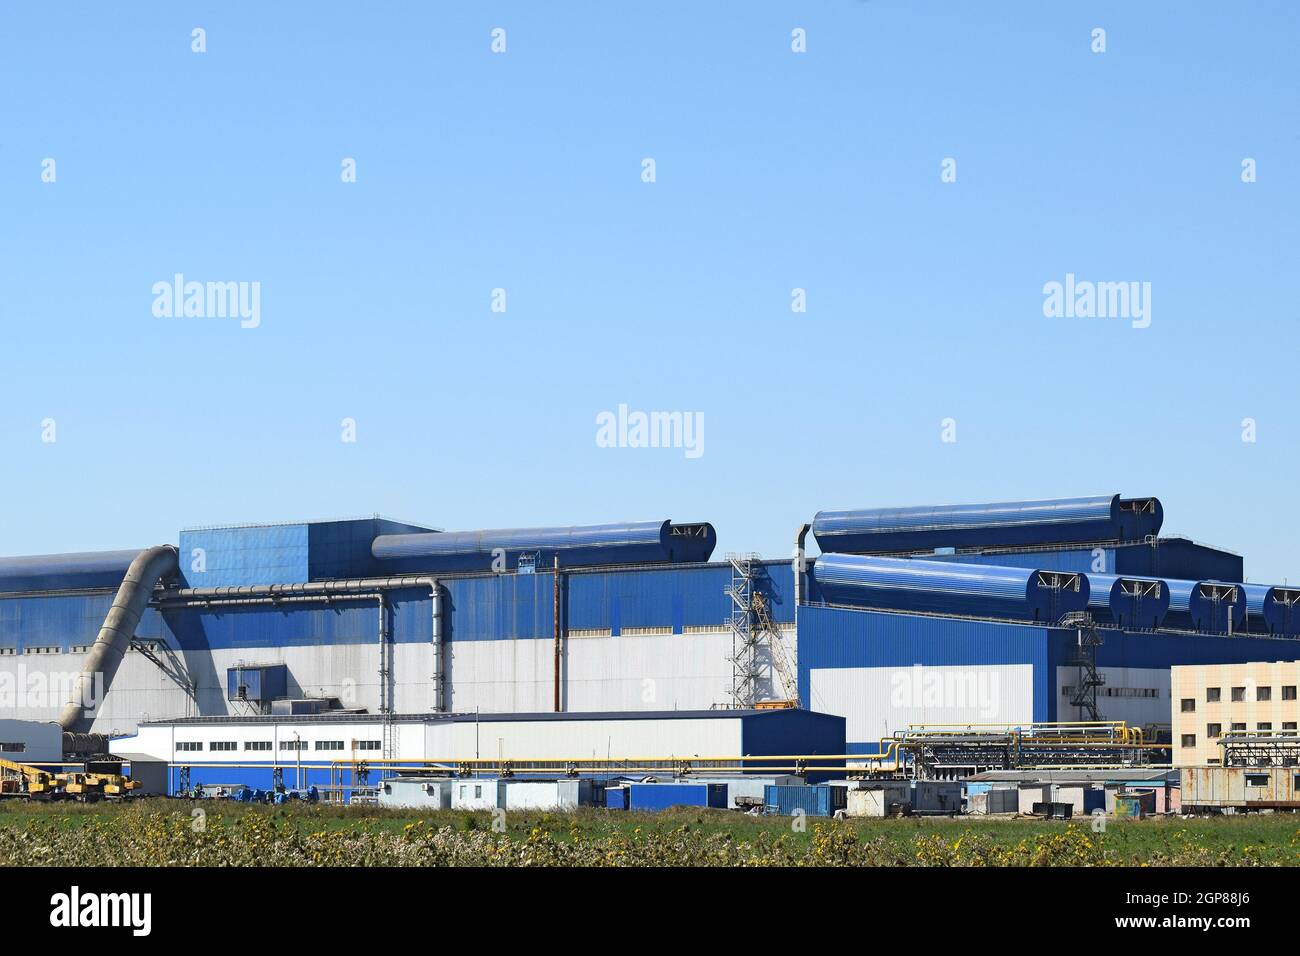 Big plant for processing scrap metal. Huge factory old metal refiner. Blue roof of the factory building. Exhaust pipes, radiators, cooling industrial Stock Photo